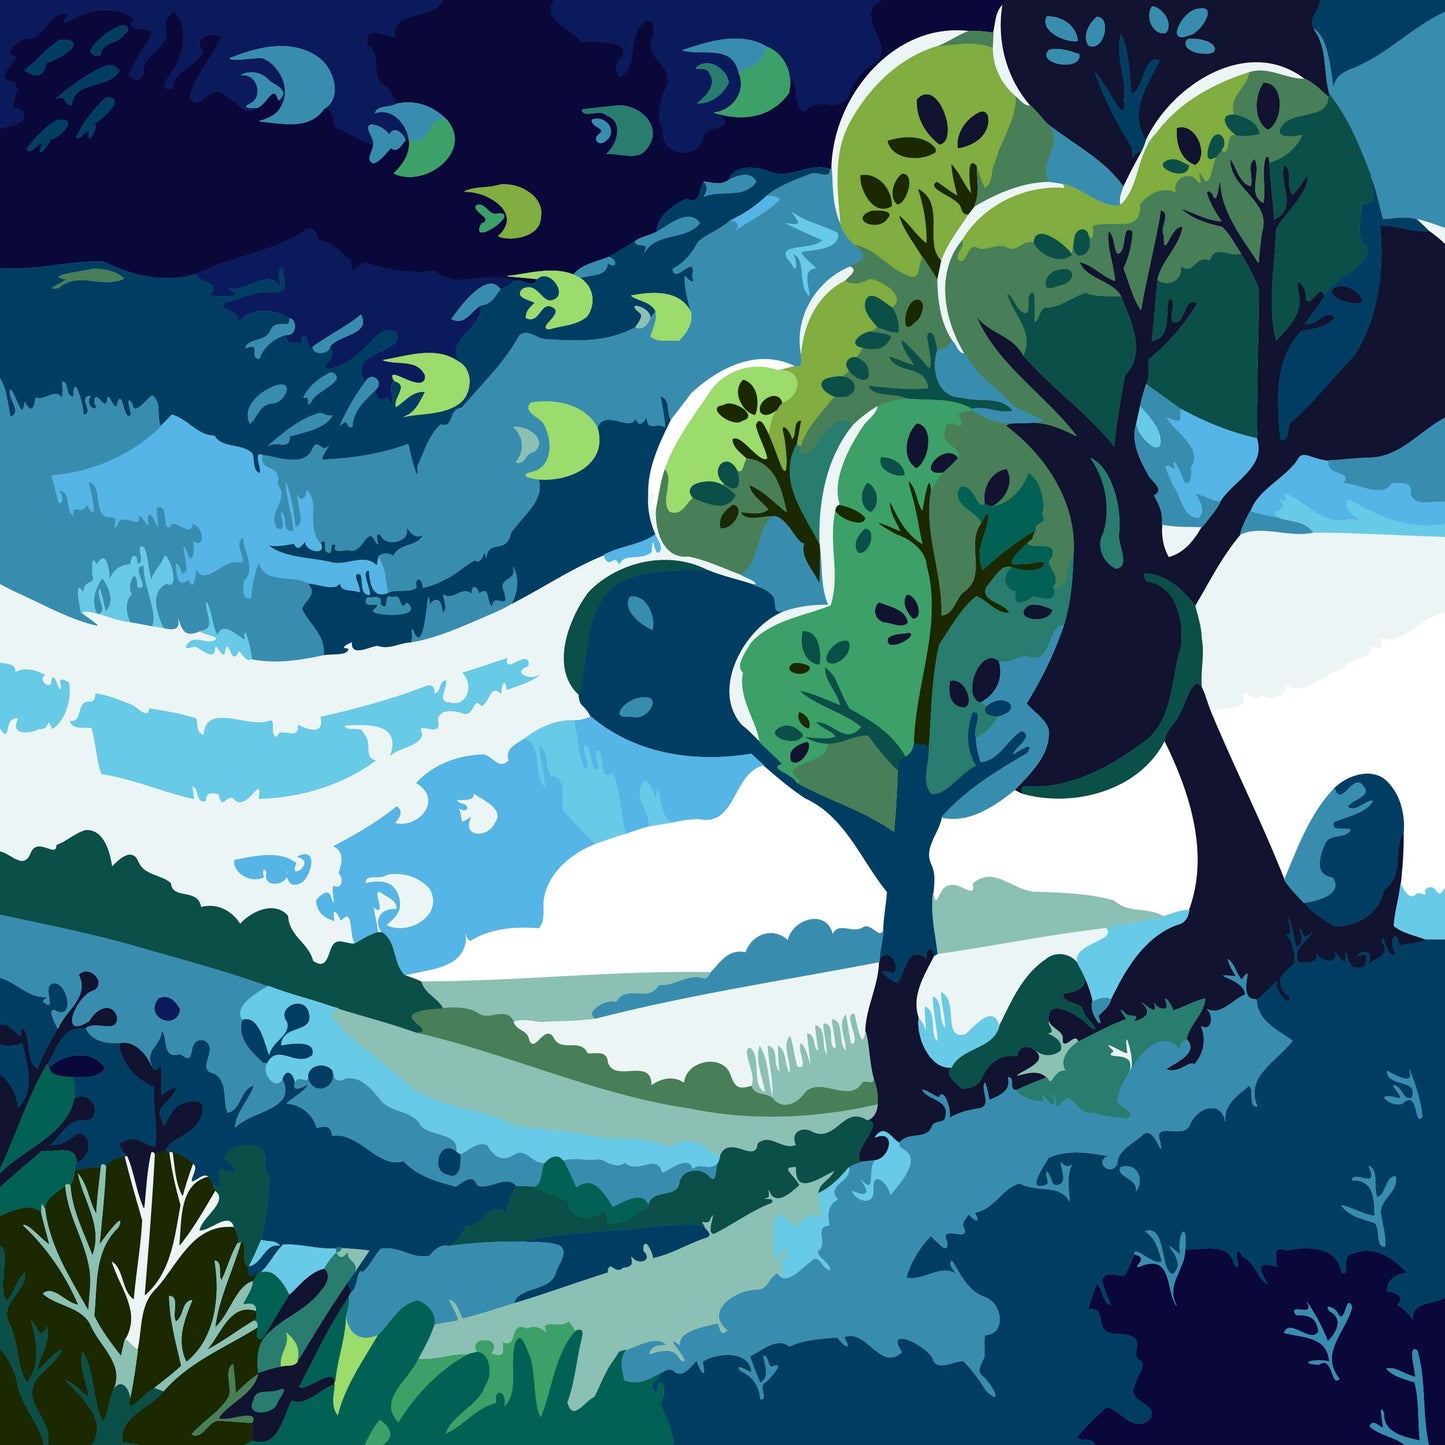 Mystical Forest - Mini Paint by Numbers Kit